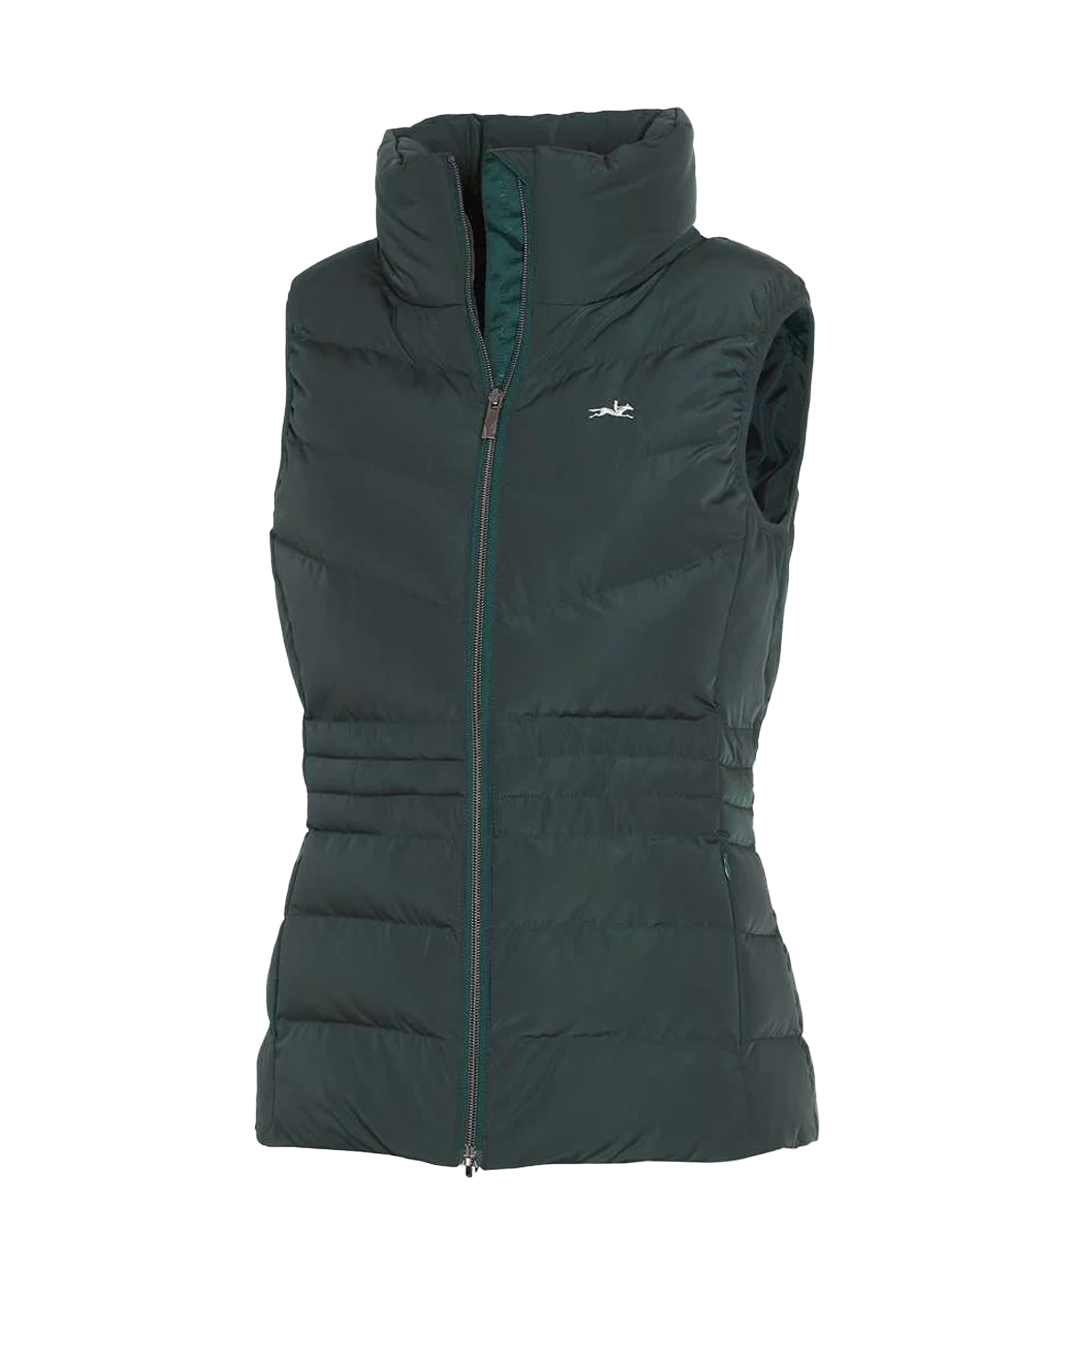 Schockemohle Merle Ladies Vest Vests Schockemohle - Equestrian Fashion Outfitters